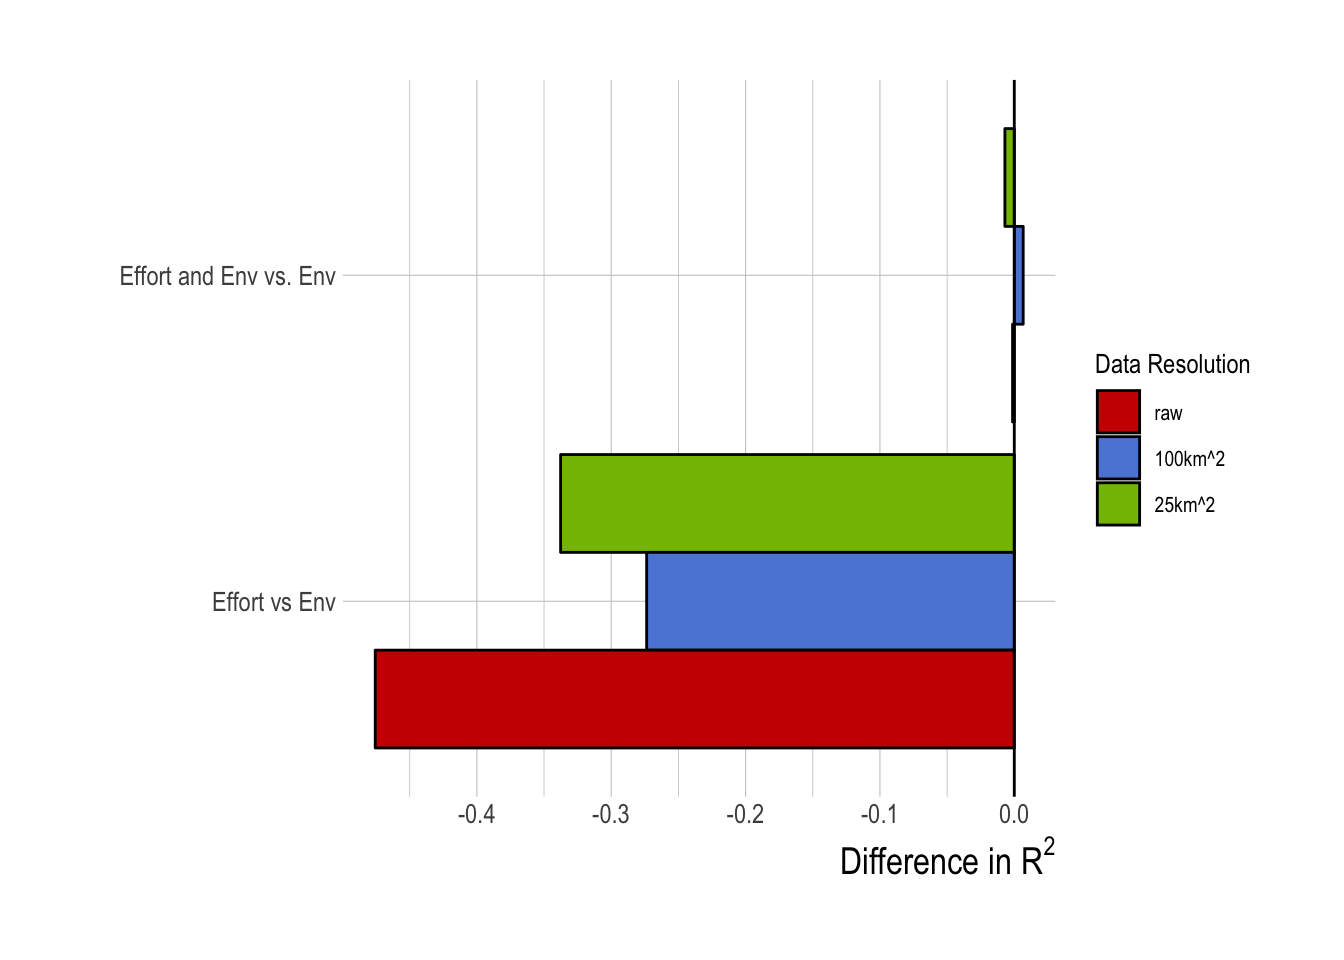 Differences in R^2^ of tuned random forest model with effort data relative to R^2^ obtained from only using environmental (env) data (negative implies worse performance than environmental data only)